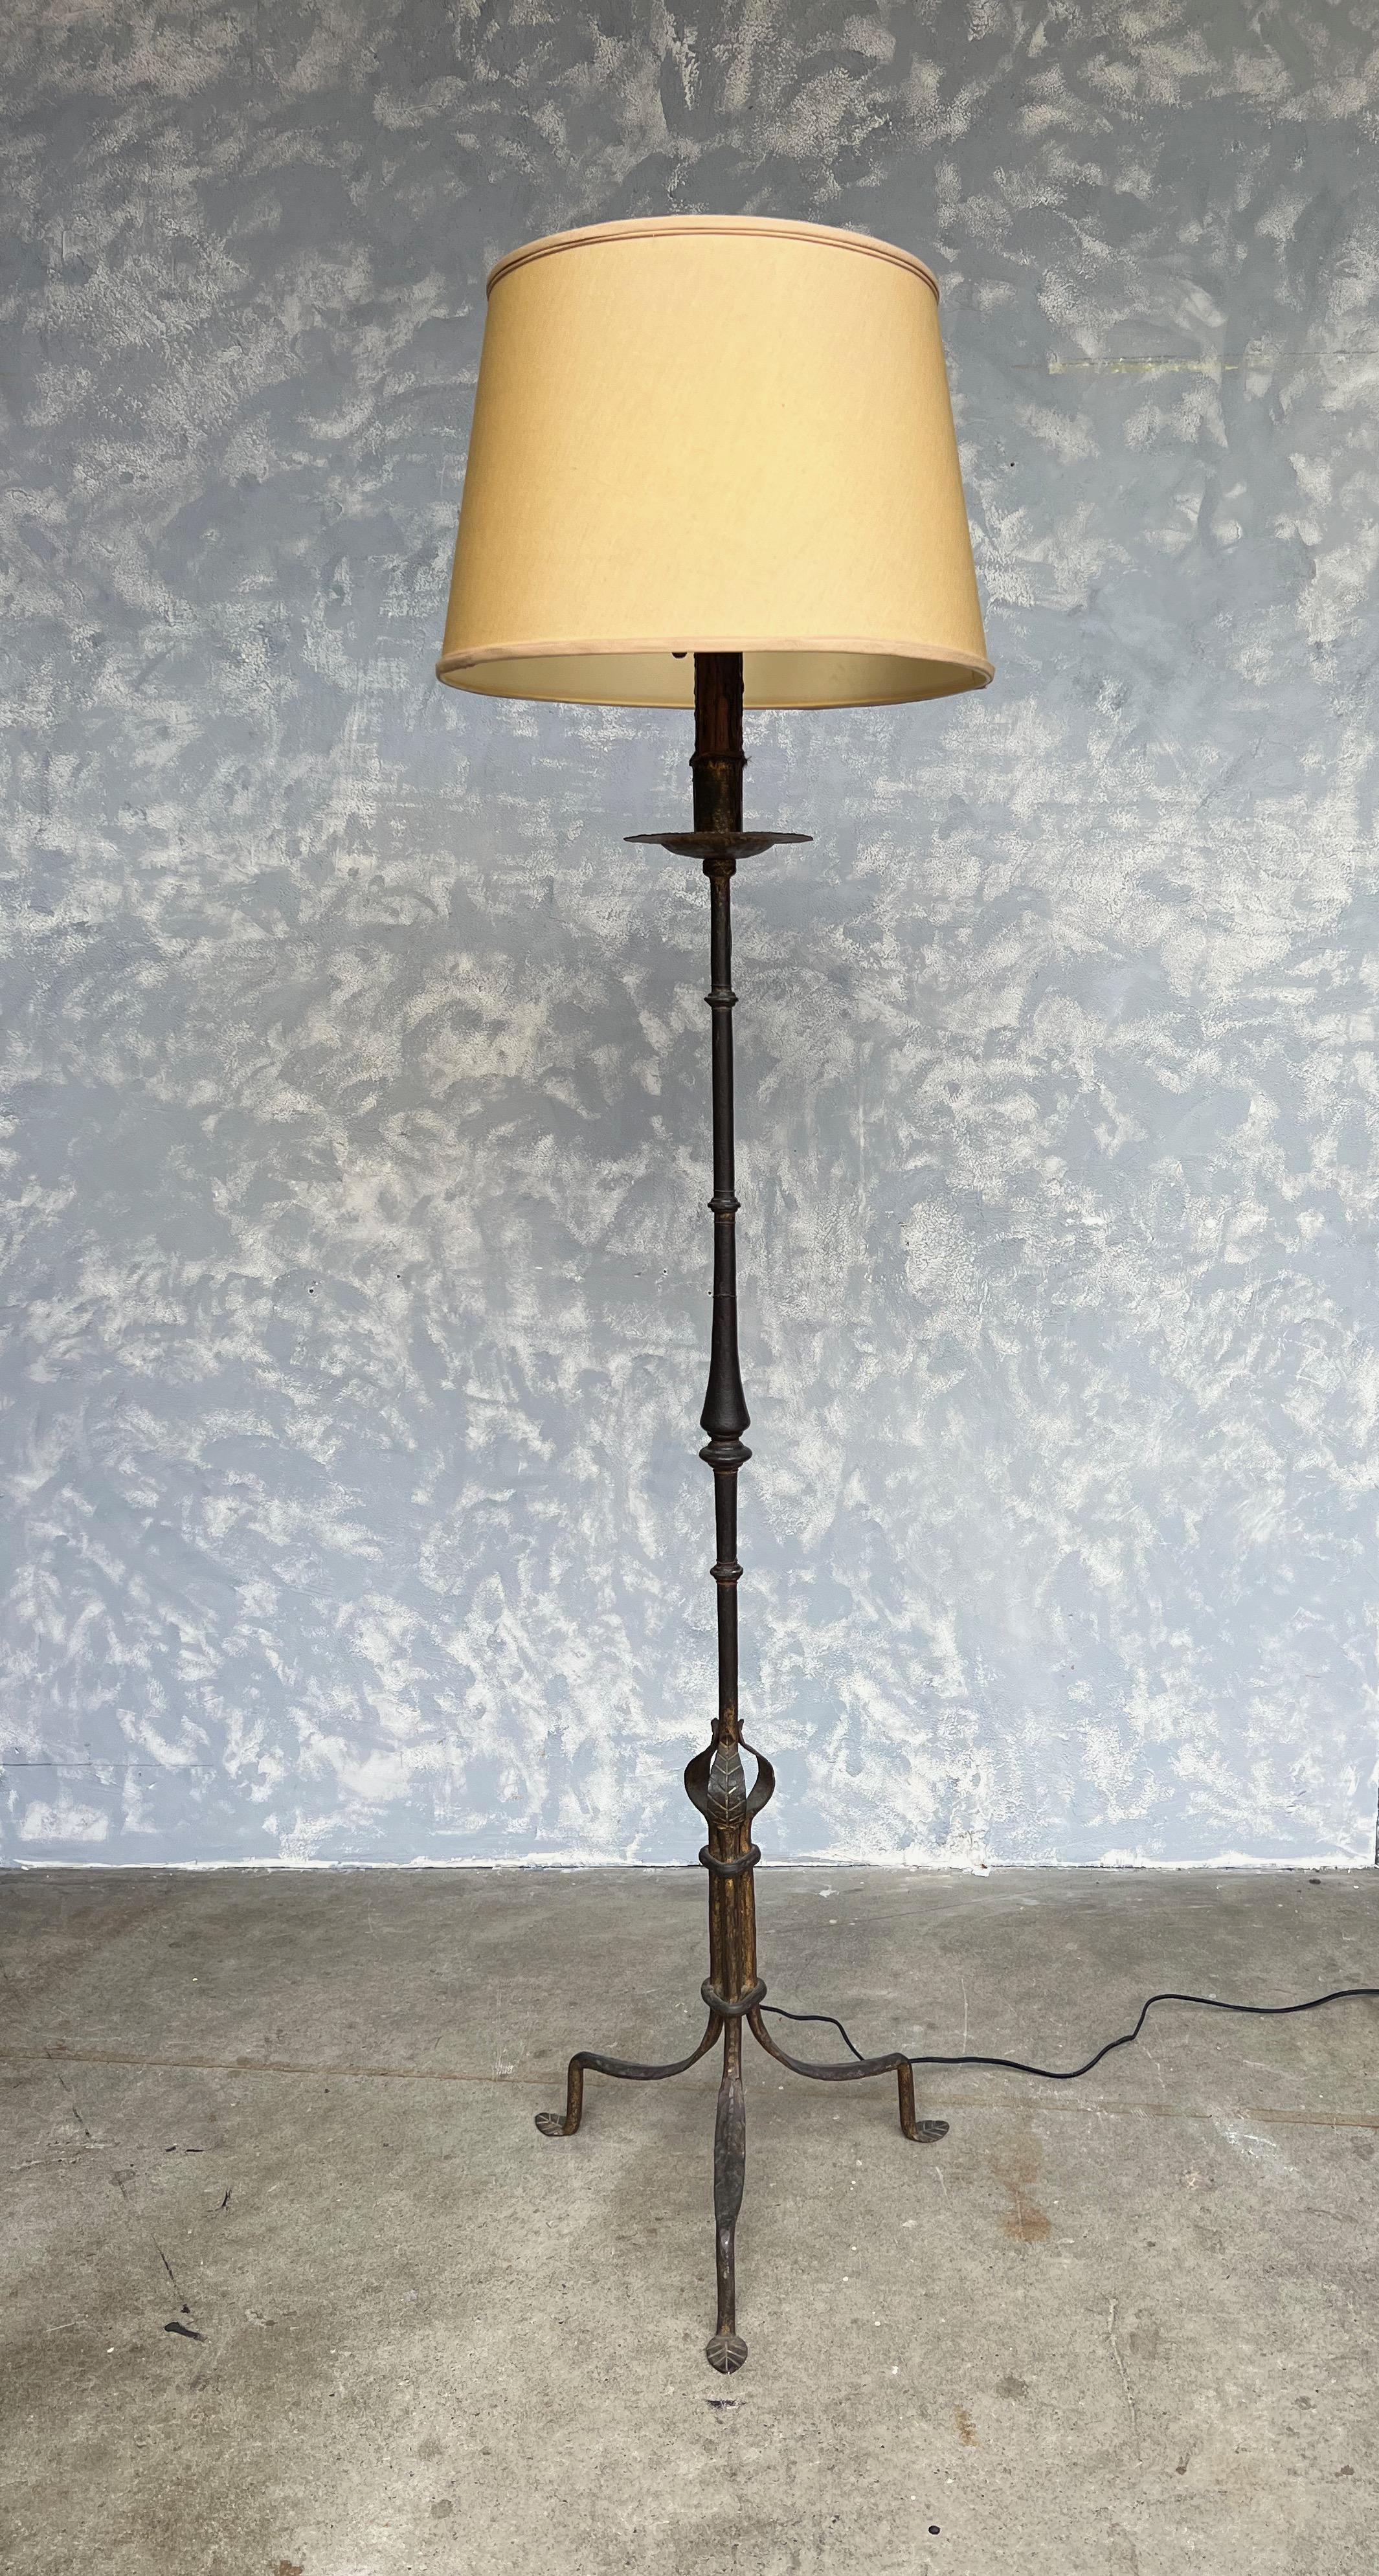 Presenting an extraordinary Spanish 1950s gilt iron floor lamp resting on an elevated tripod base. This lamp boasts a beautifully aged dark gold patina and a stunning hand-hammered texture, creating a captivating visual appeal. The upper part of the